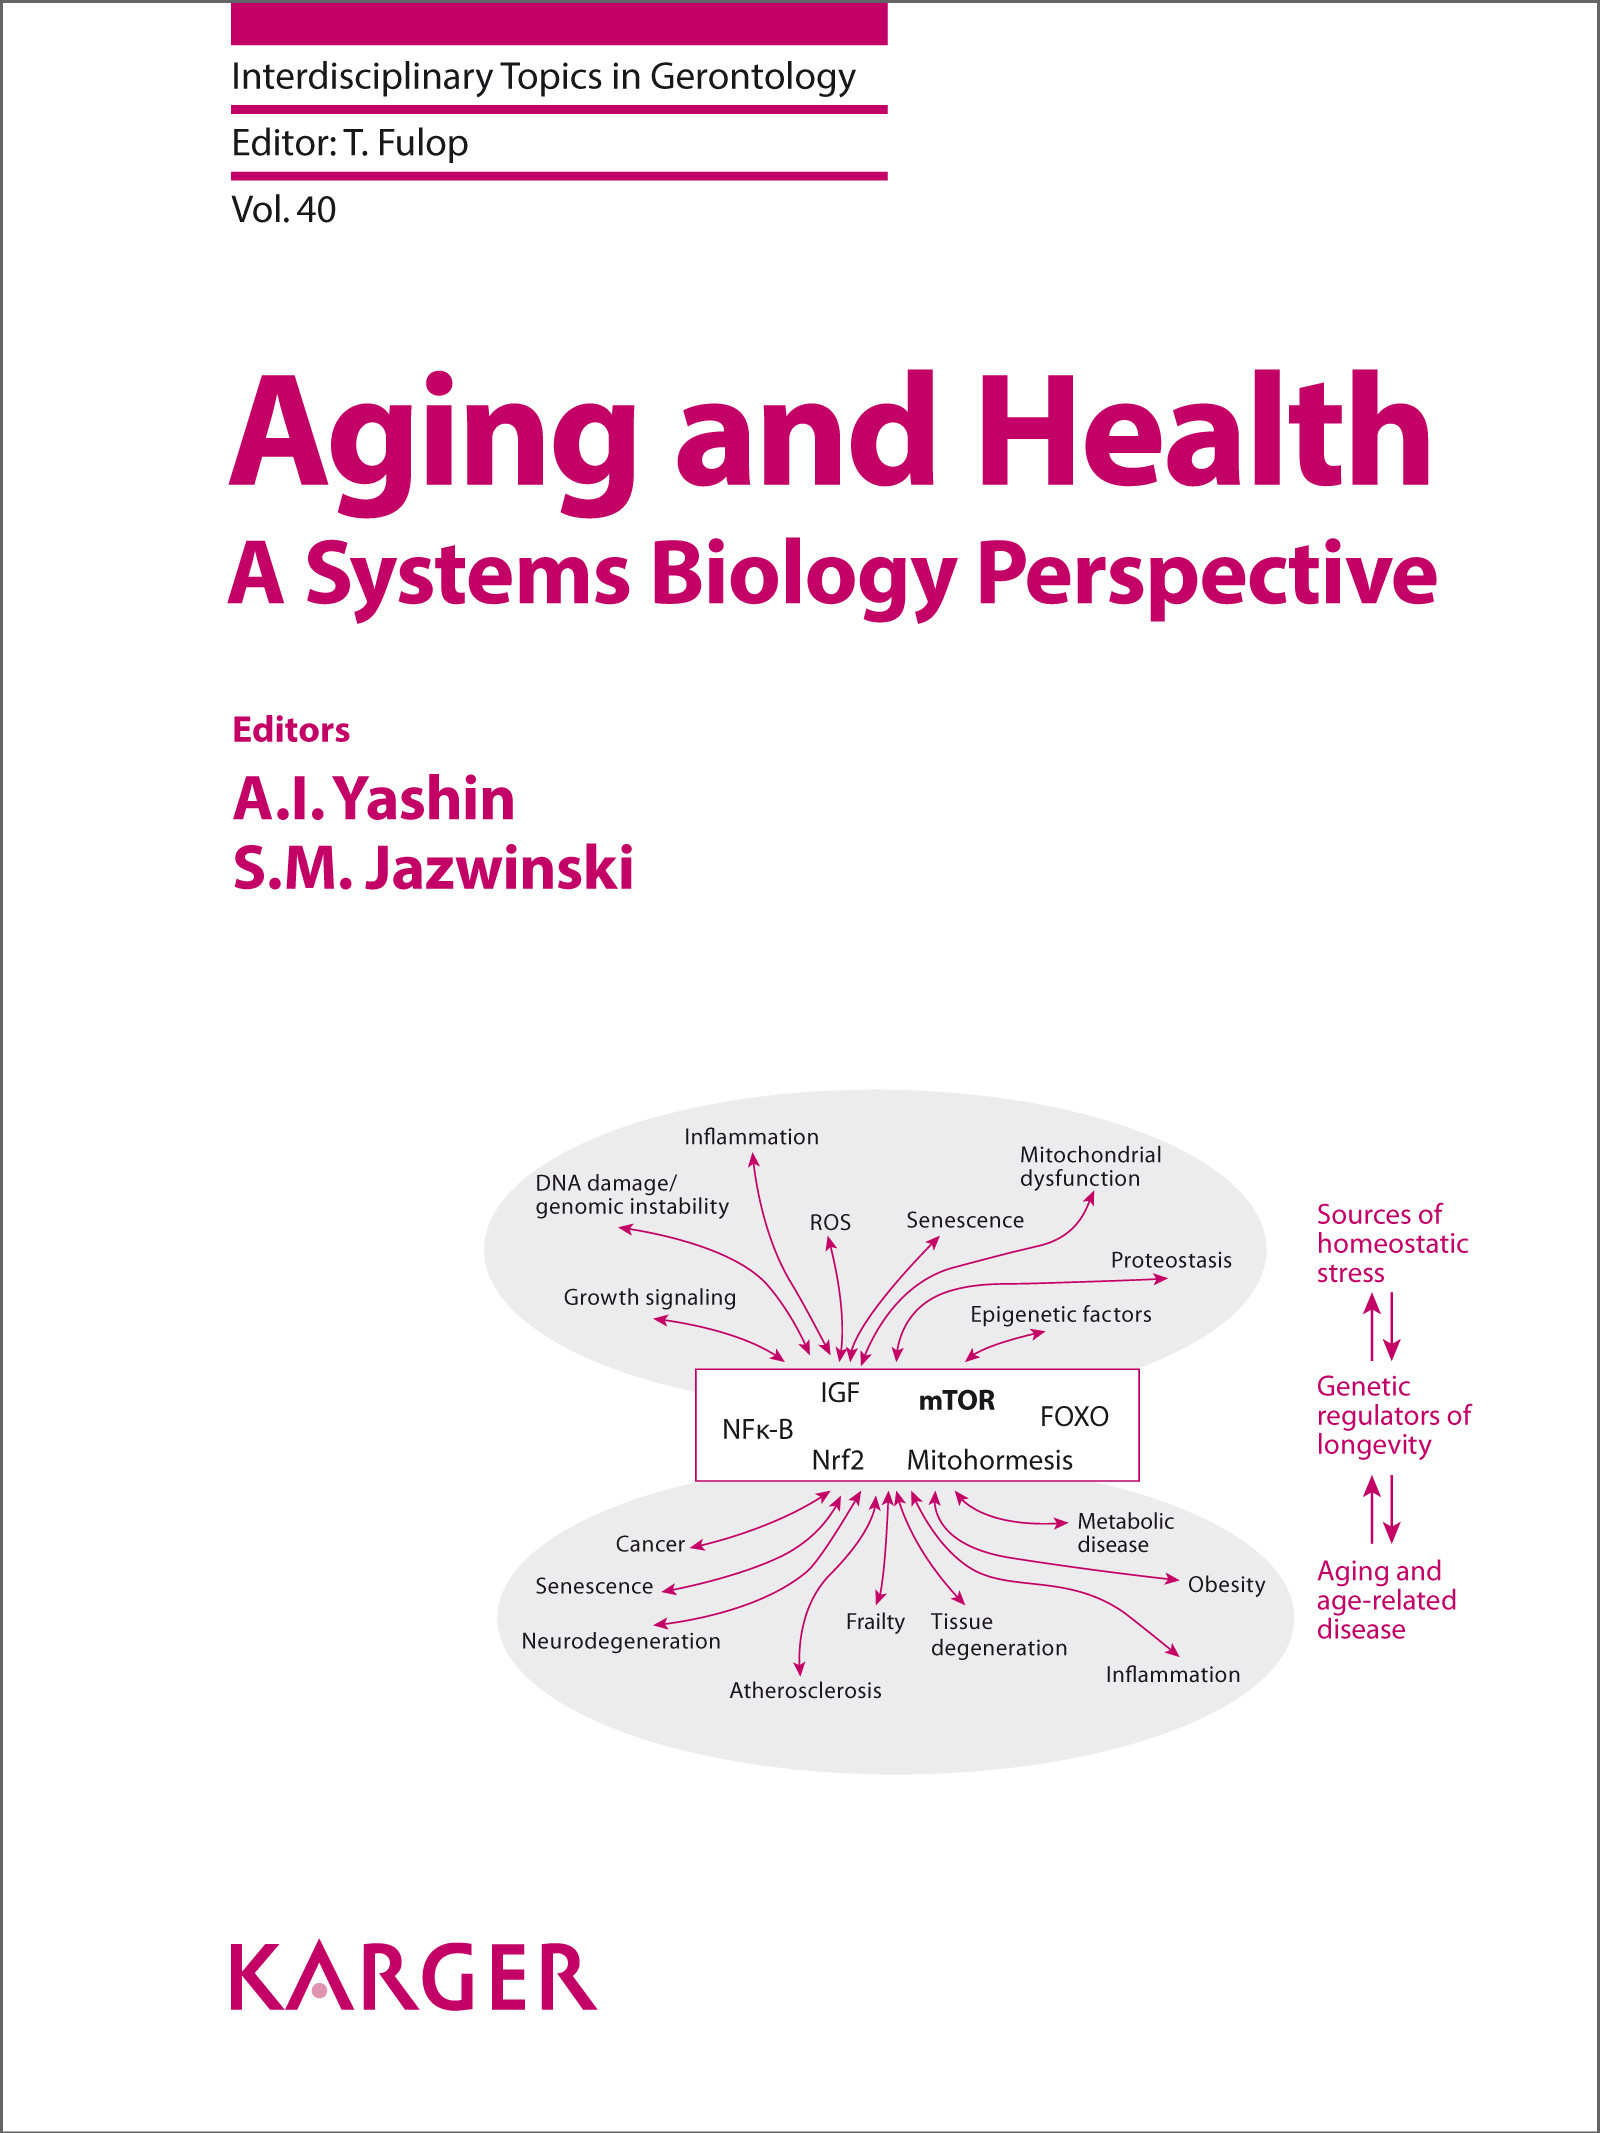 Aging and Health - A Systems Biology Perspective